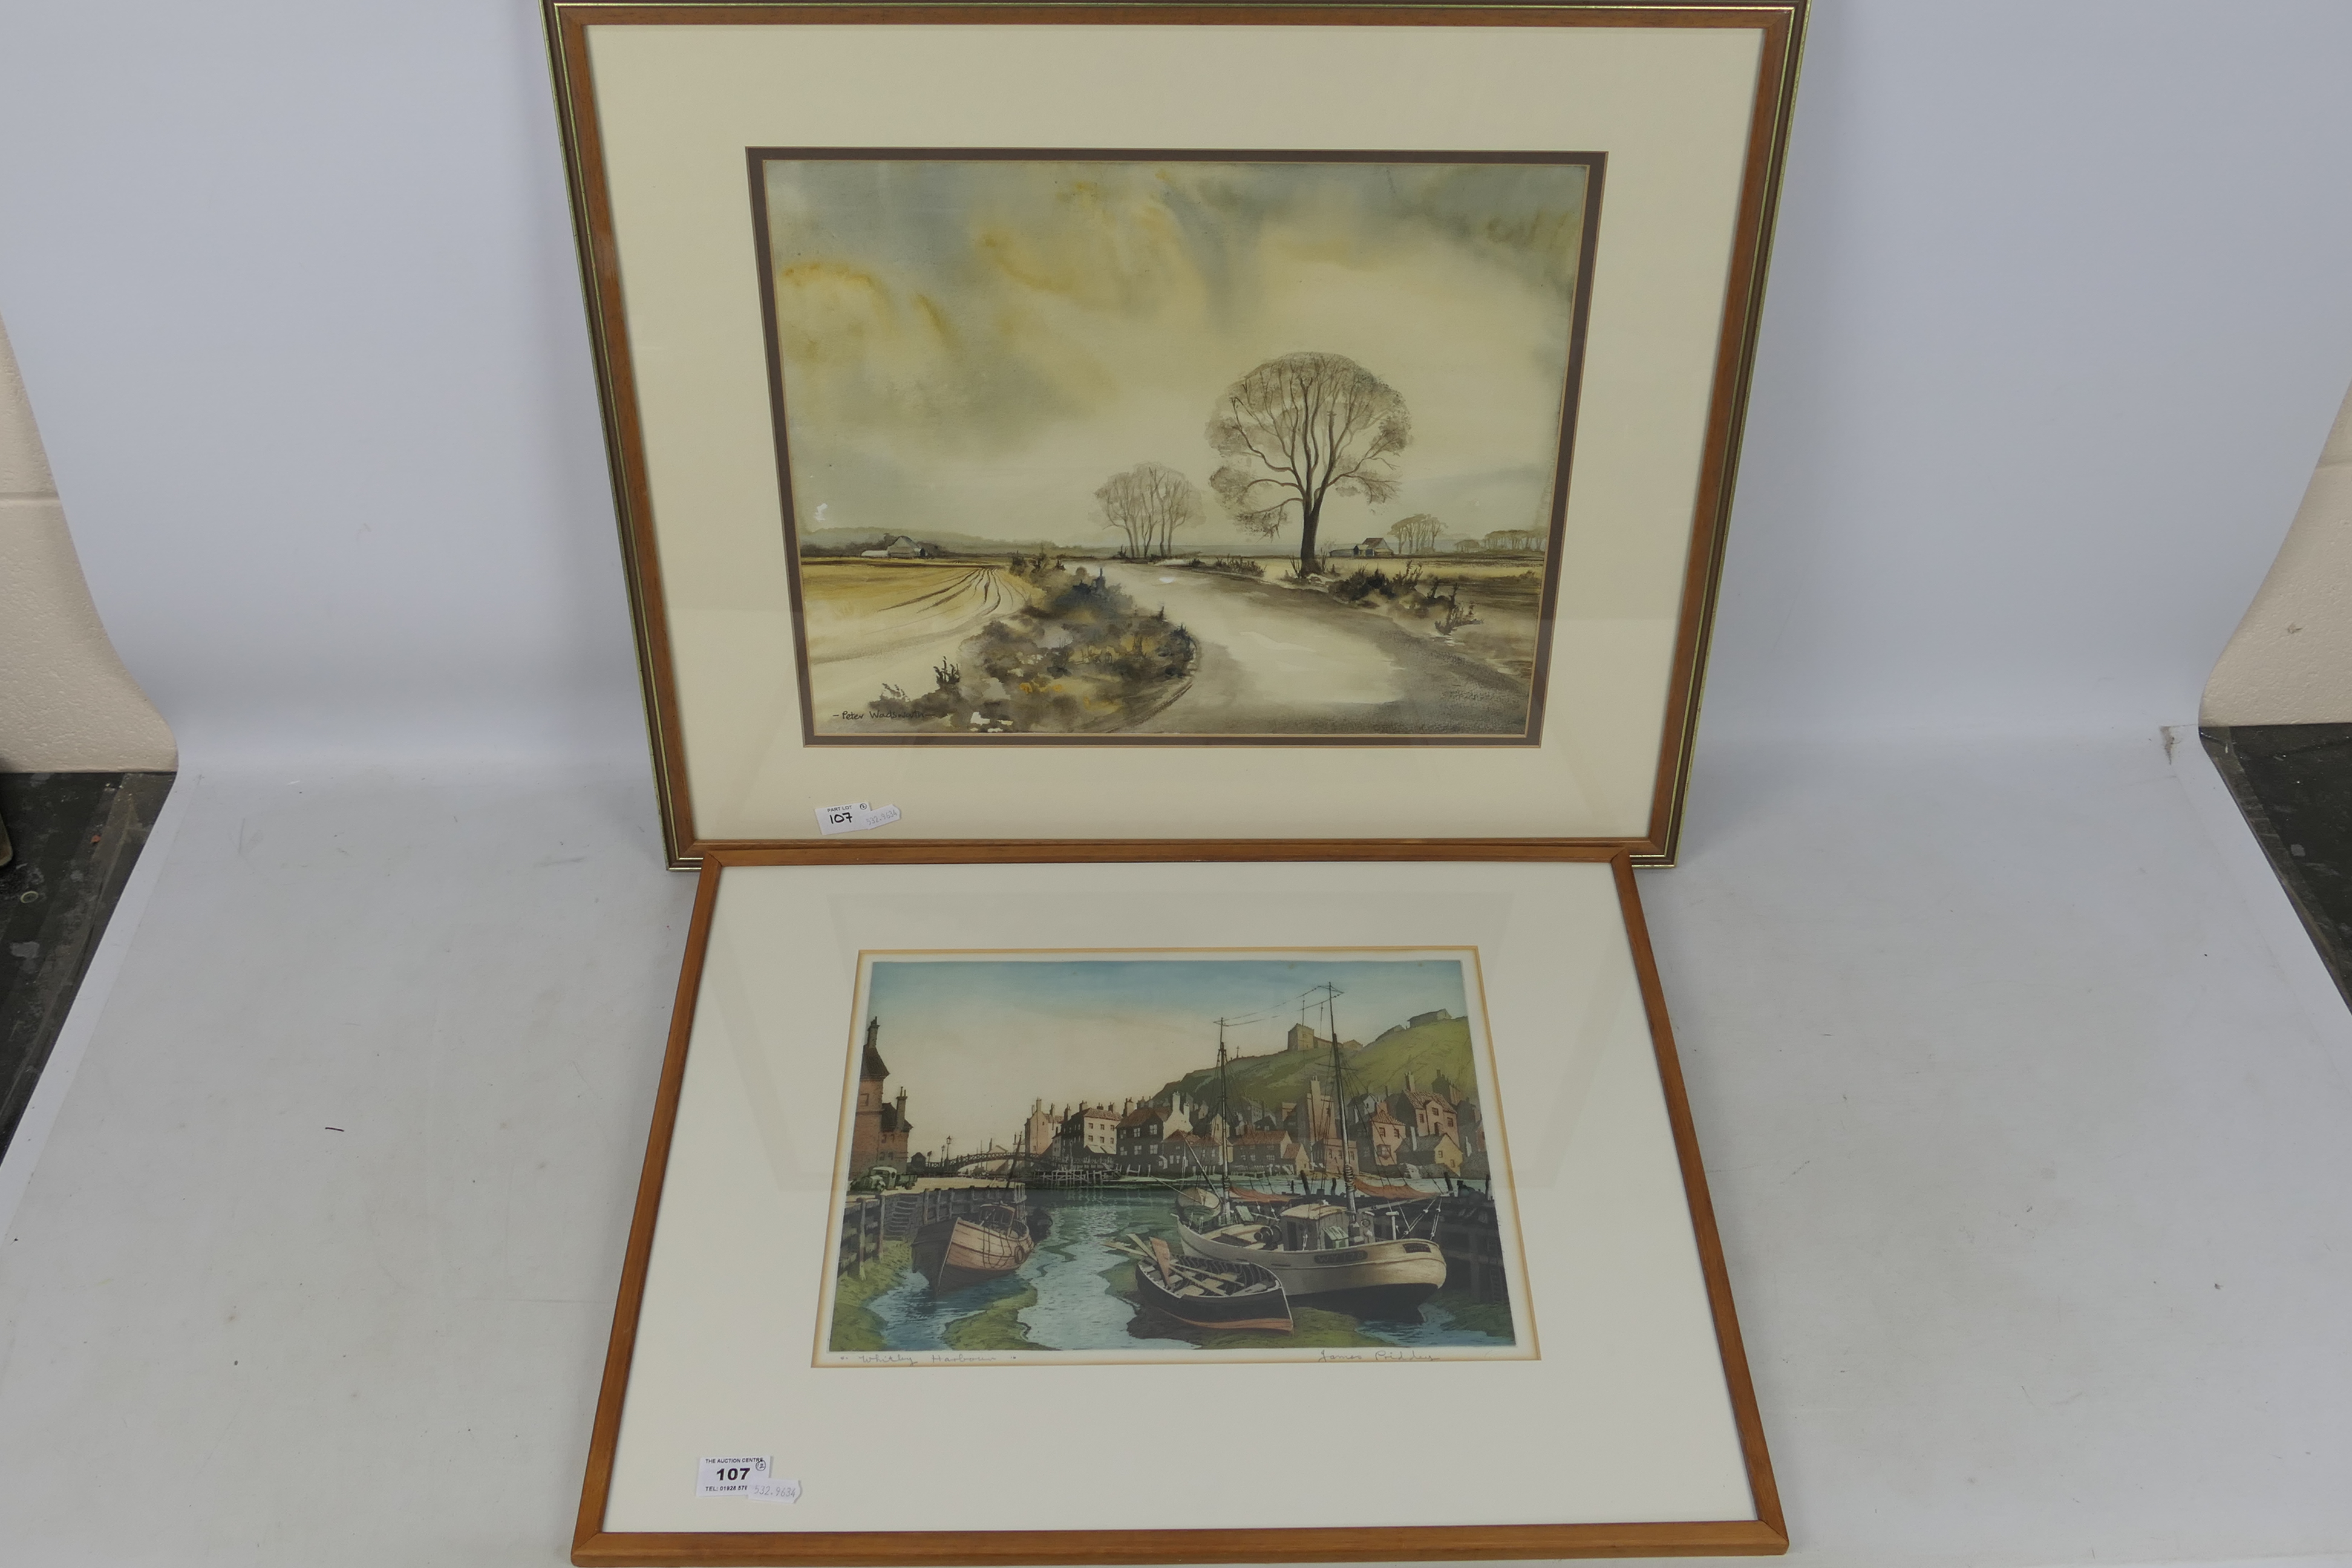 Lot to include a framed watercolour landscape scene signed lower left by the artist Peter Wadsworth